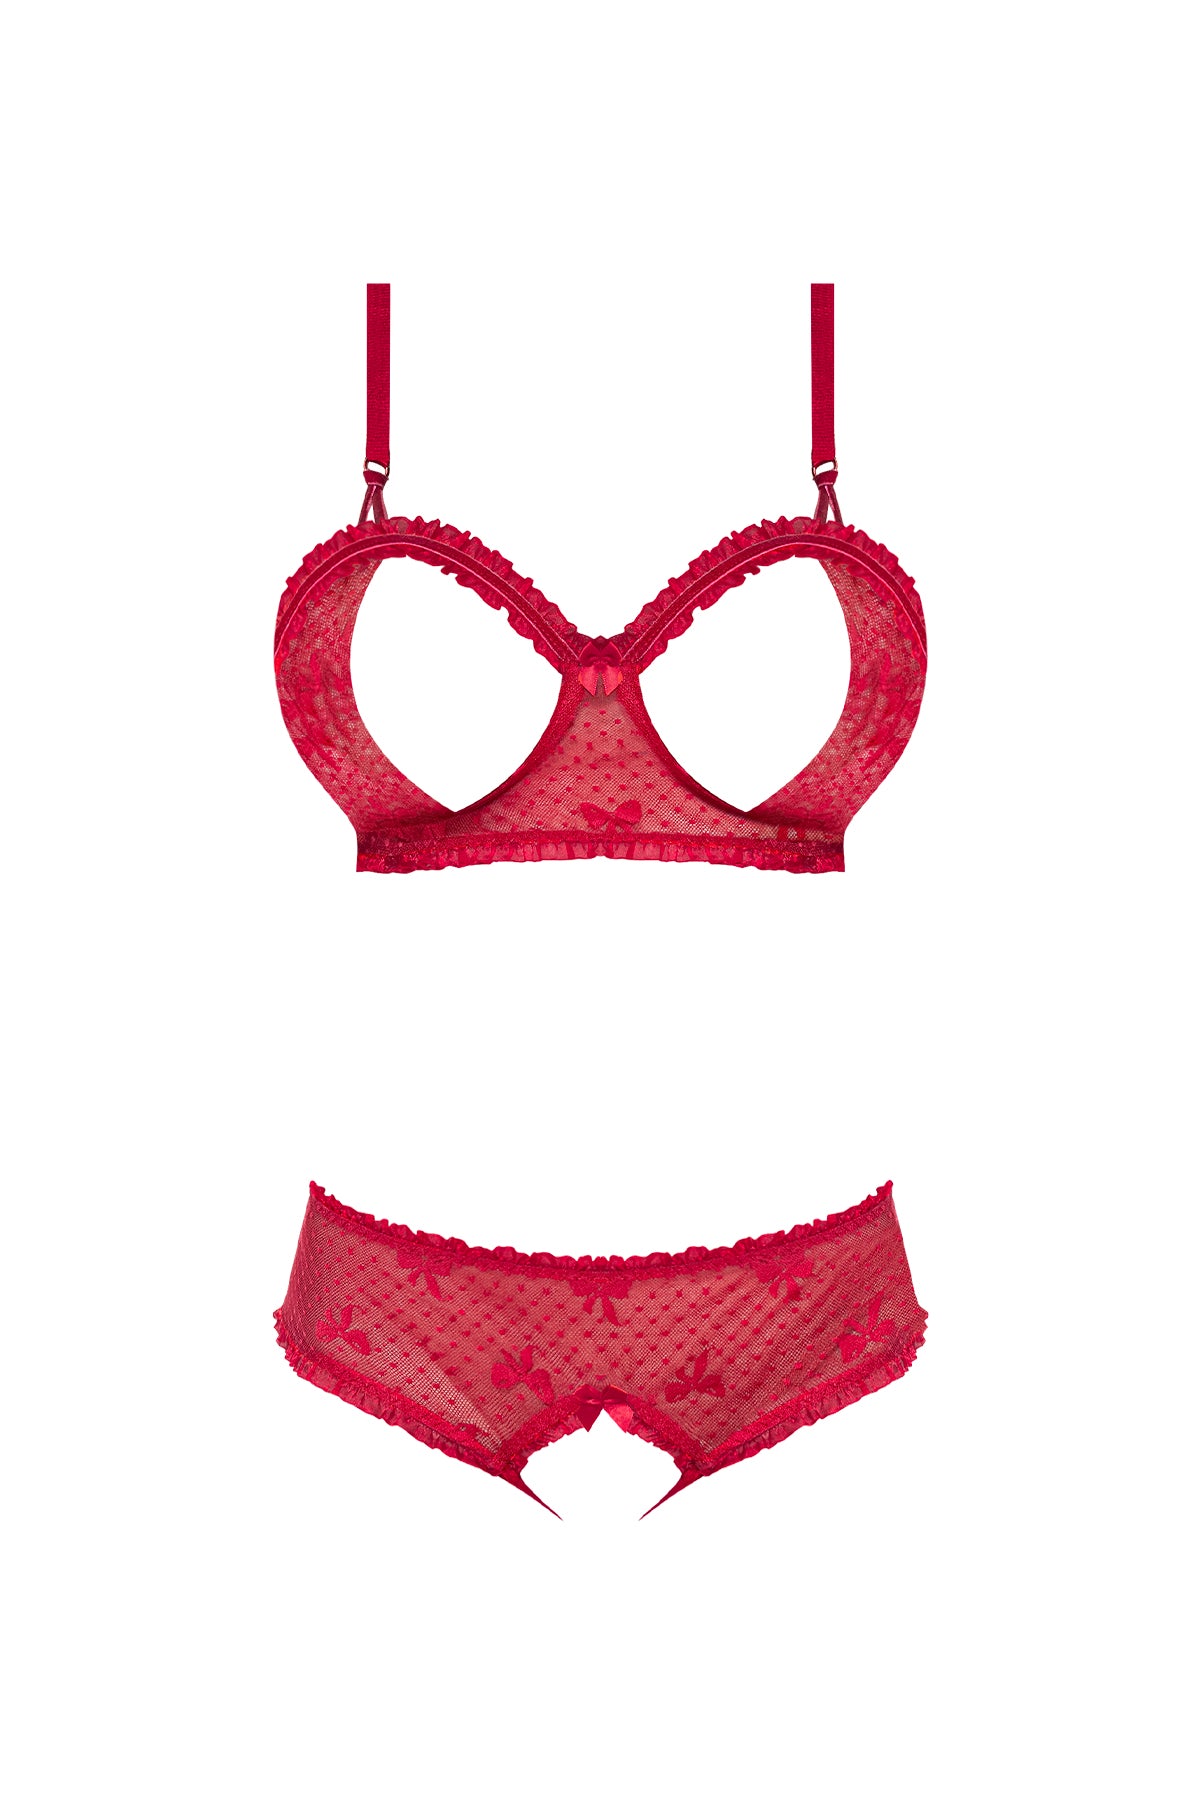 Magic Silk With Love Balconette Bra & Open-Crotch Panty Red - Romantic  Blessings